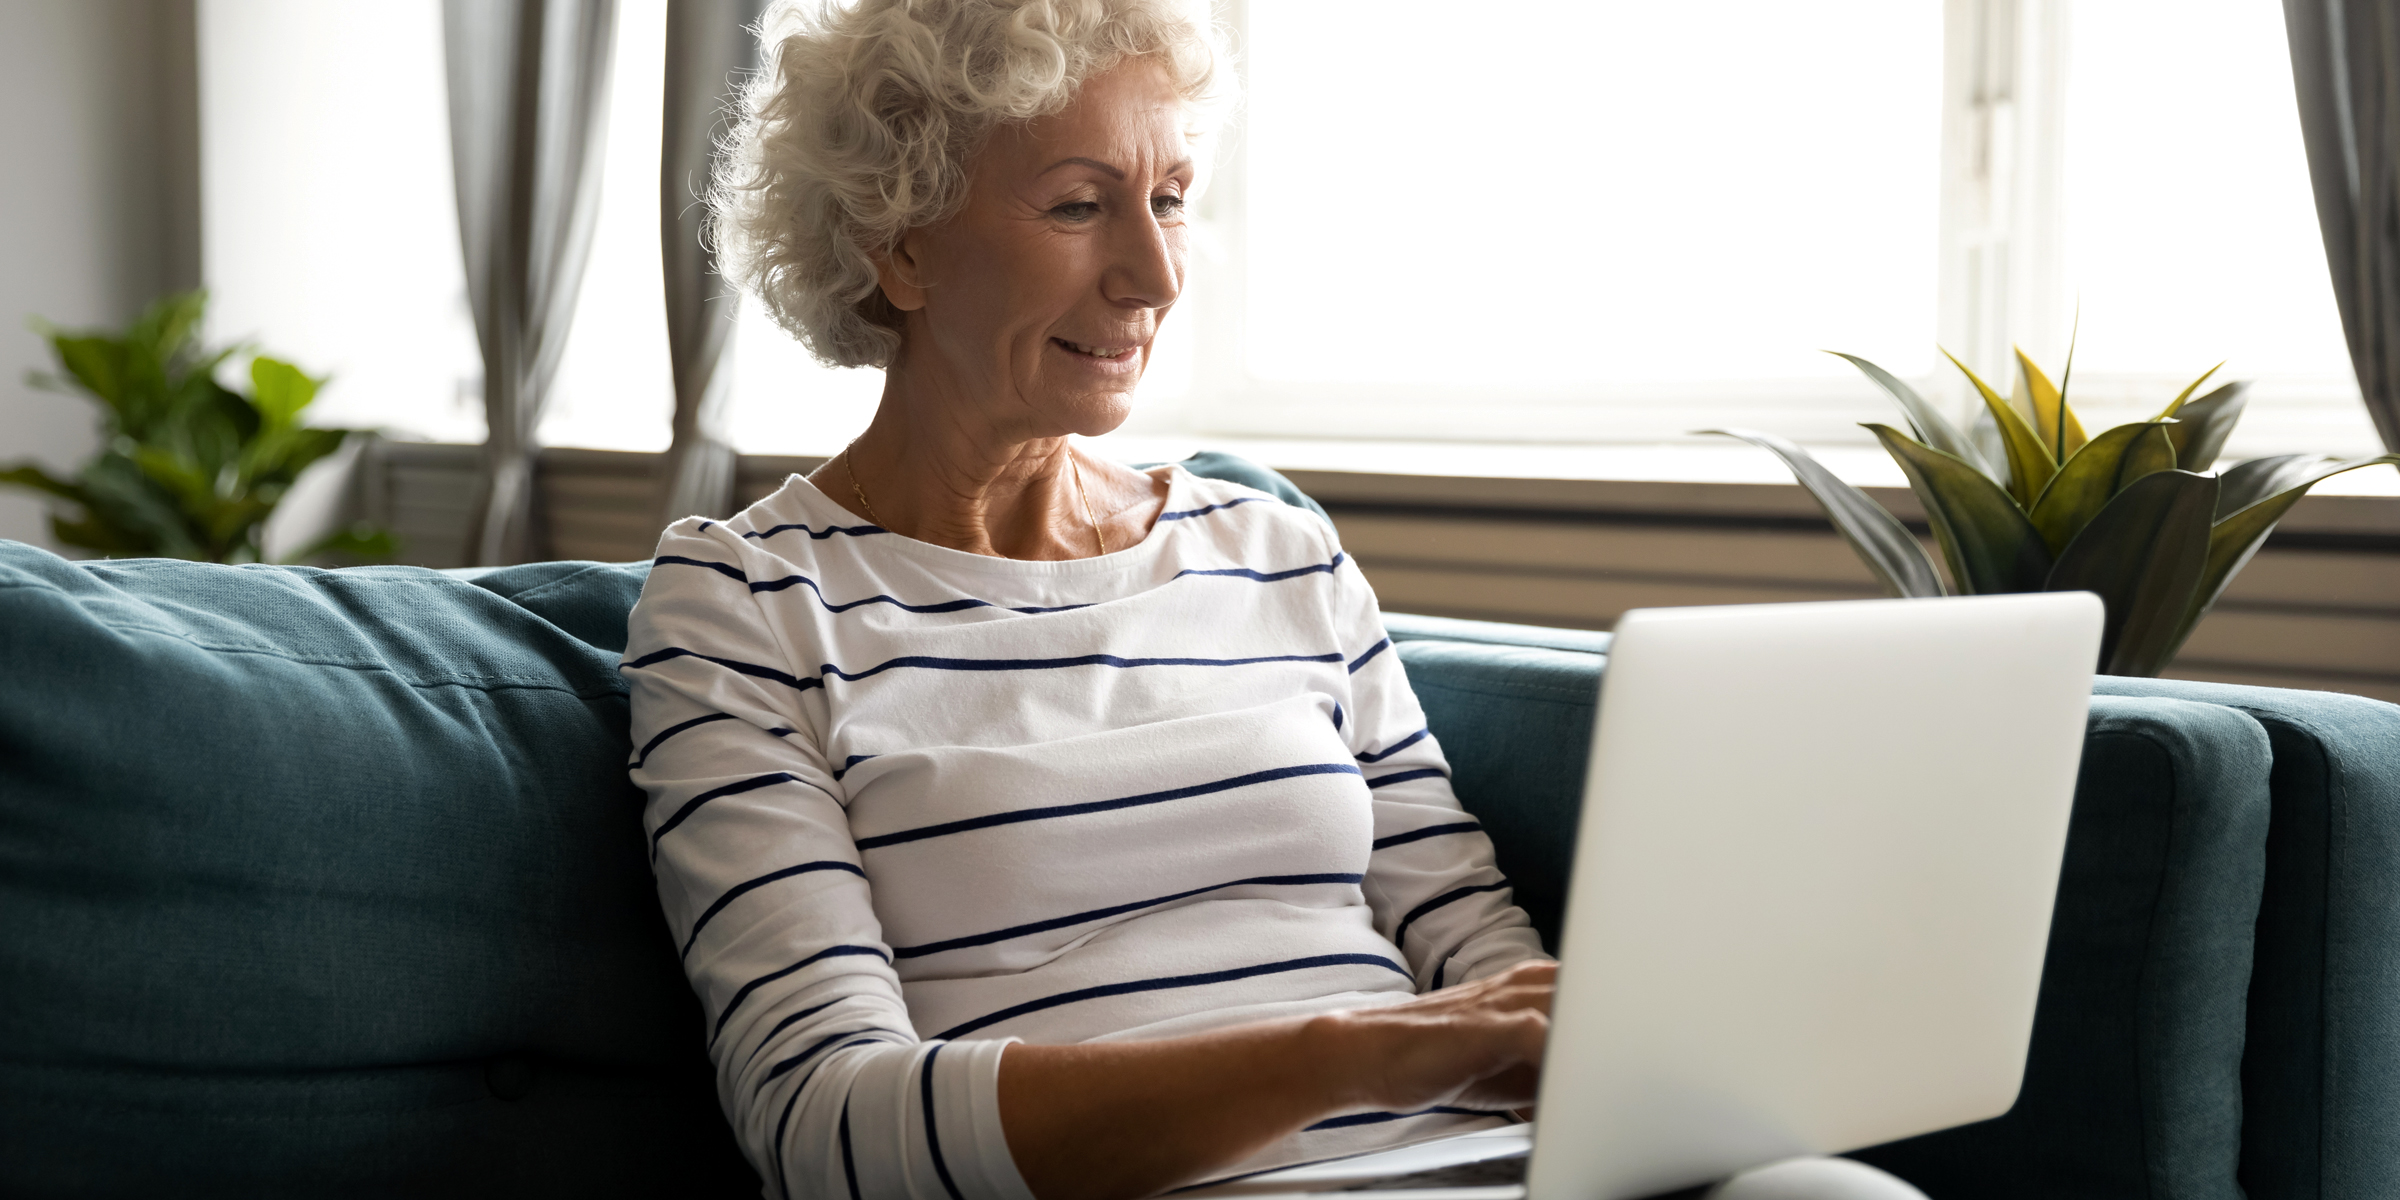 Elderly lady with her laptop | Source: Shutterstock